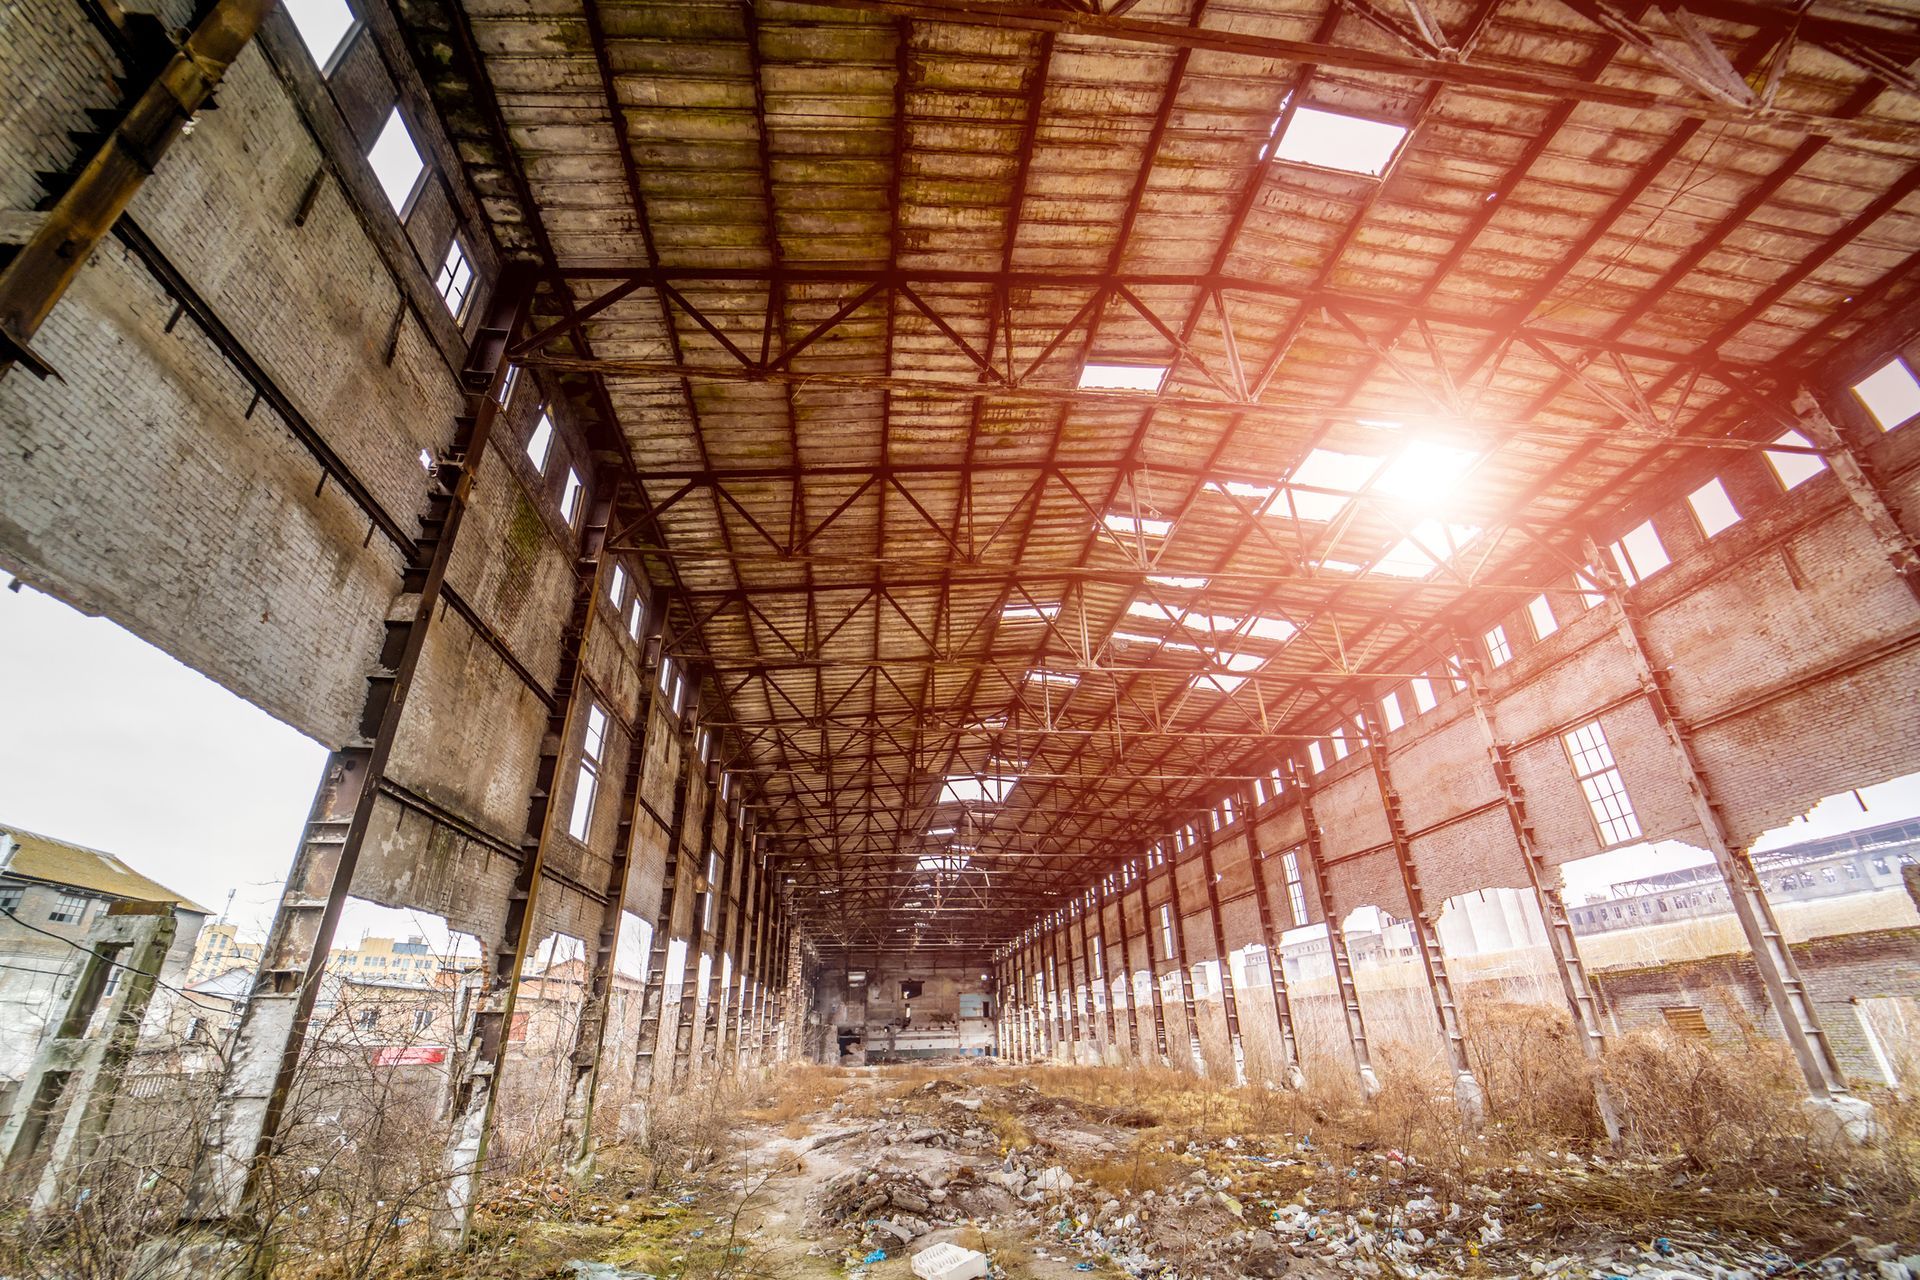 The sun is shining through the roof of an abandoned building.